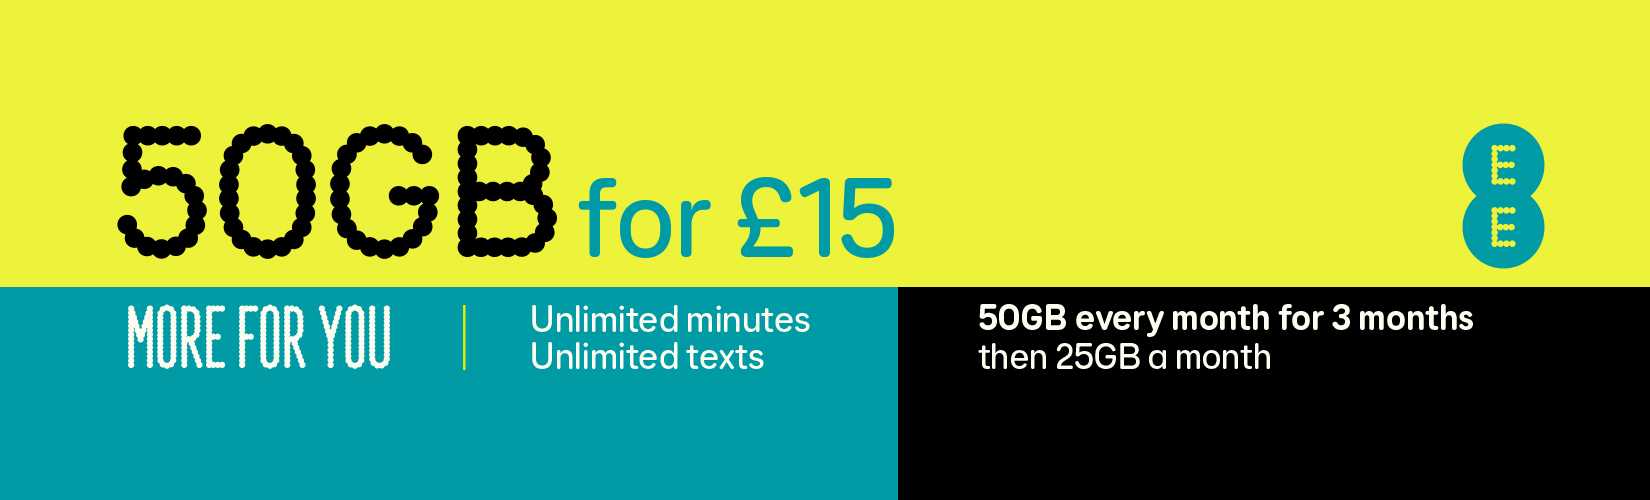 EE. 50GB for £15.